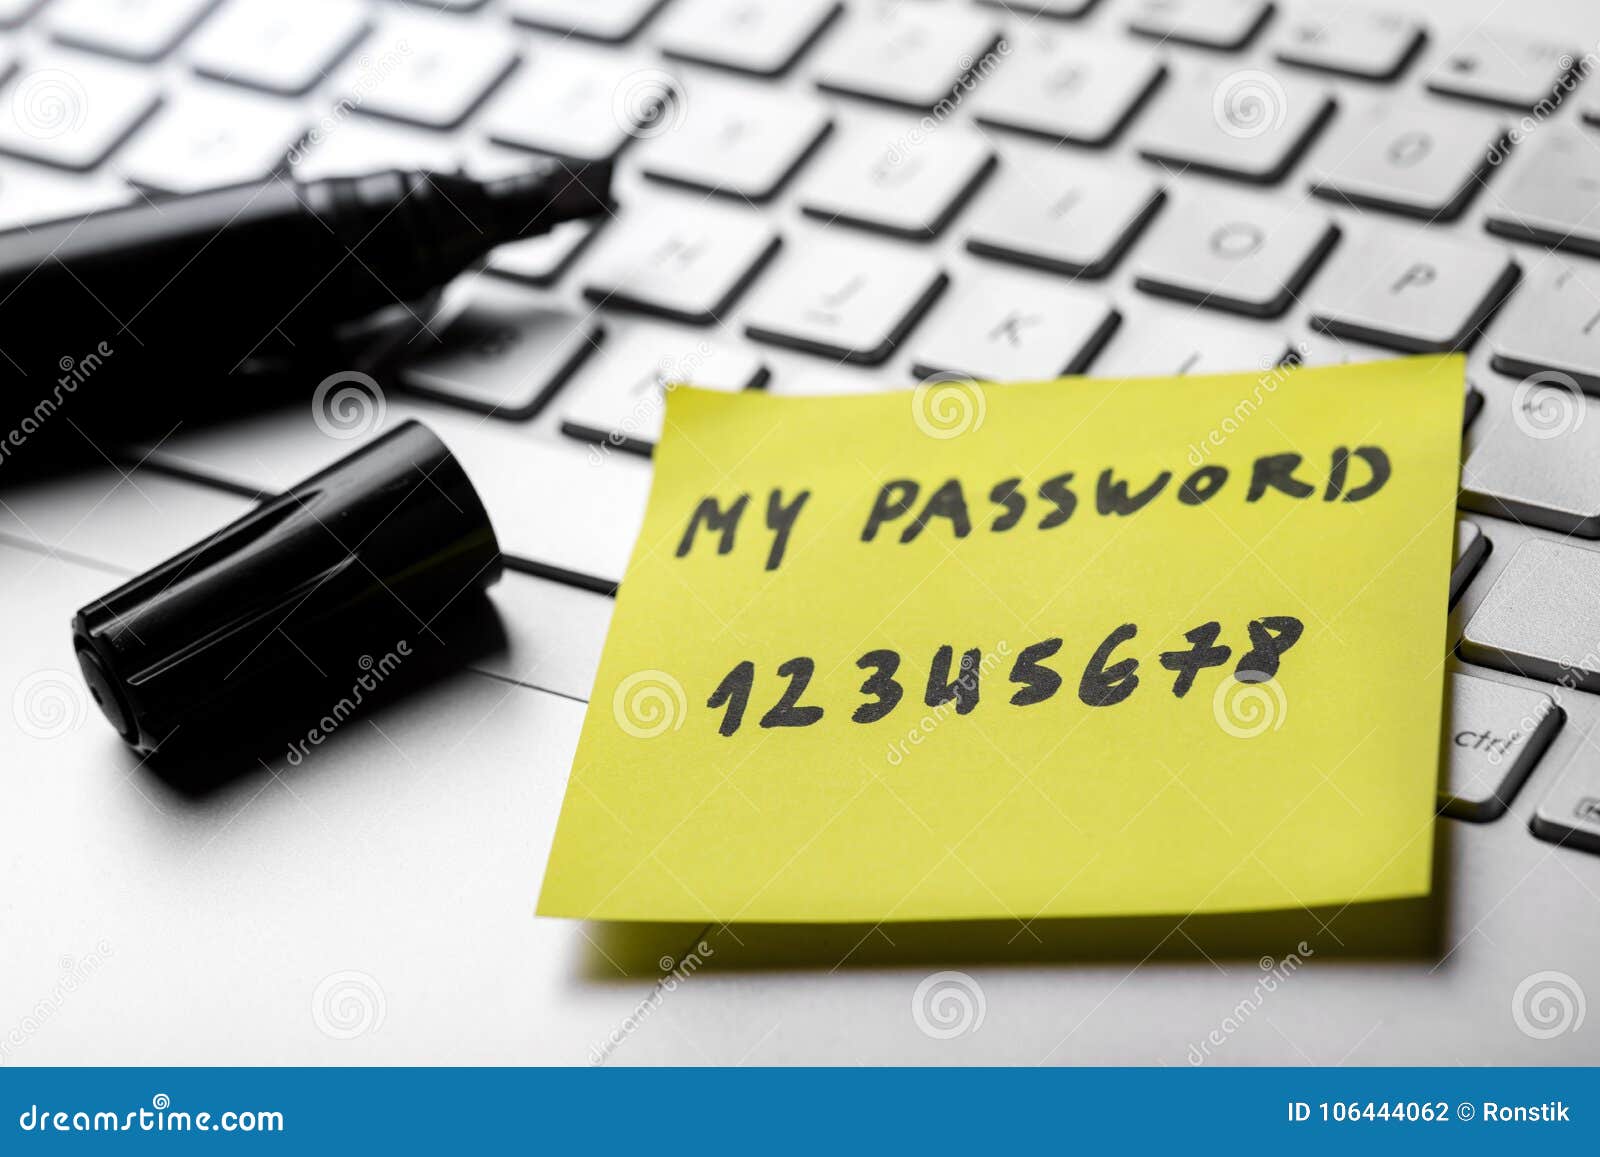 sticky note with weak easy password on laptop keyboard